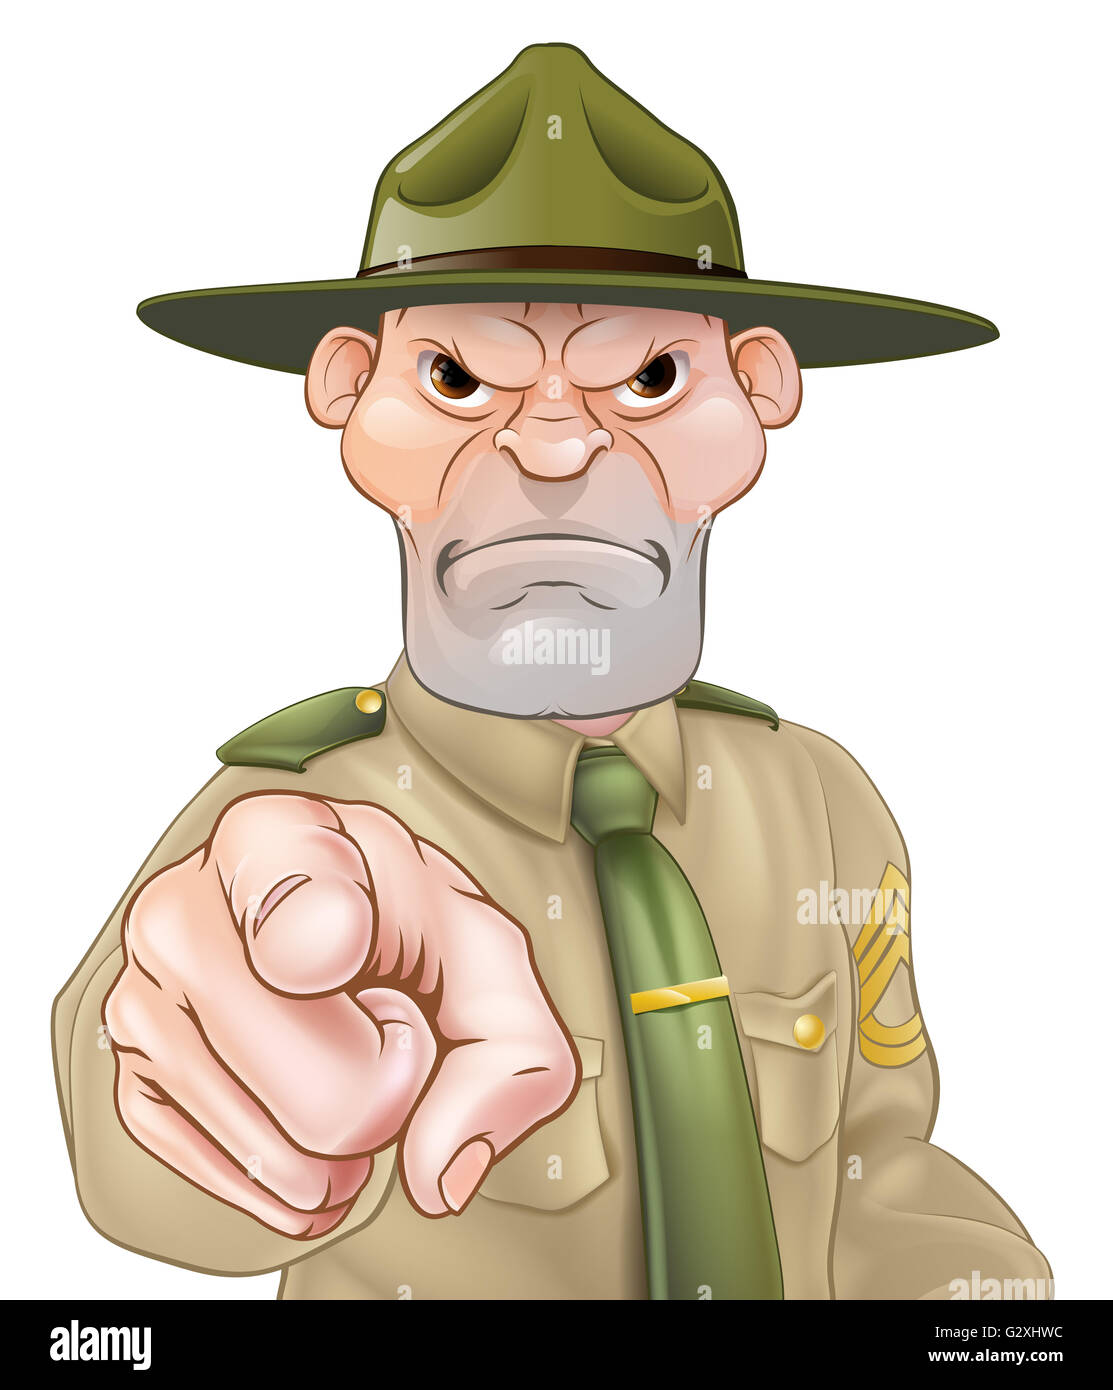 Angry cartoon army boot camp drill sergeant pointing Stock Photo